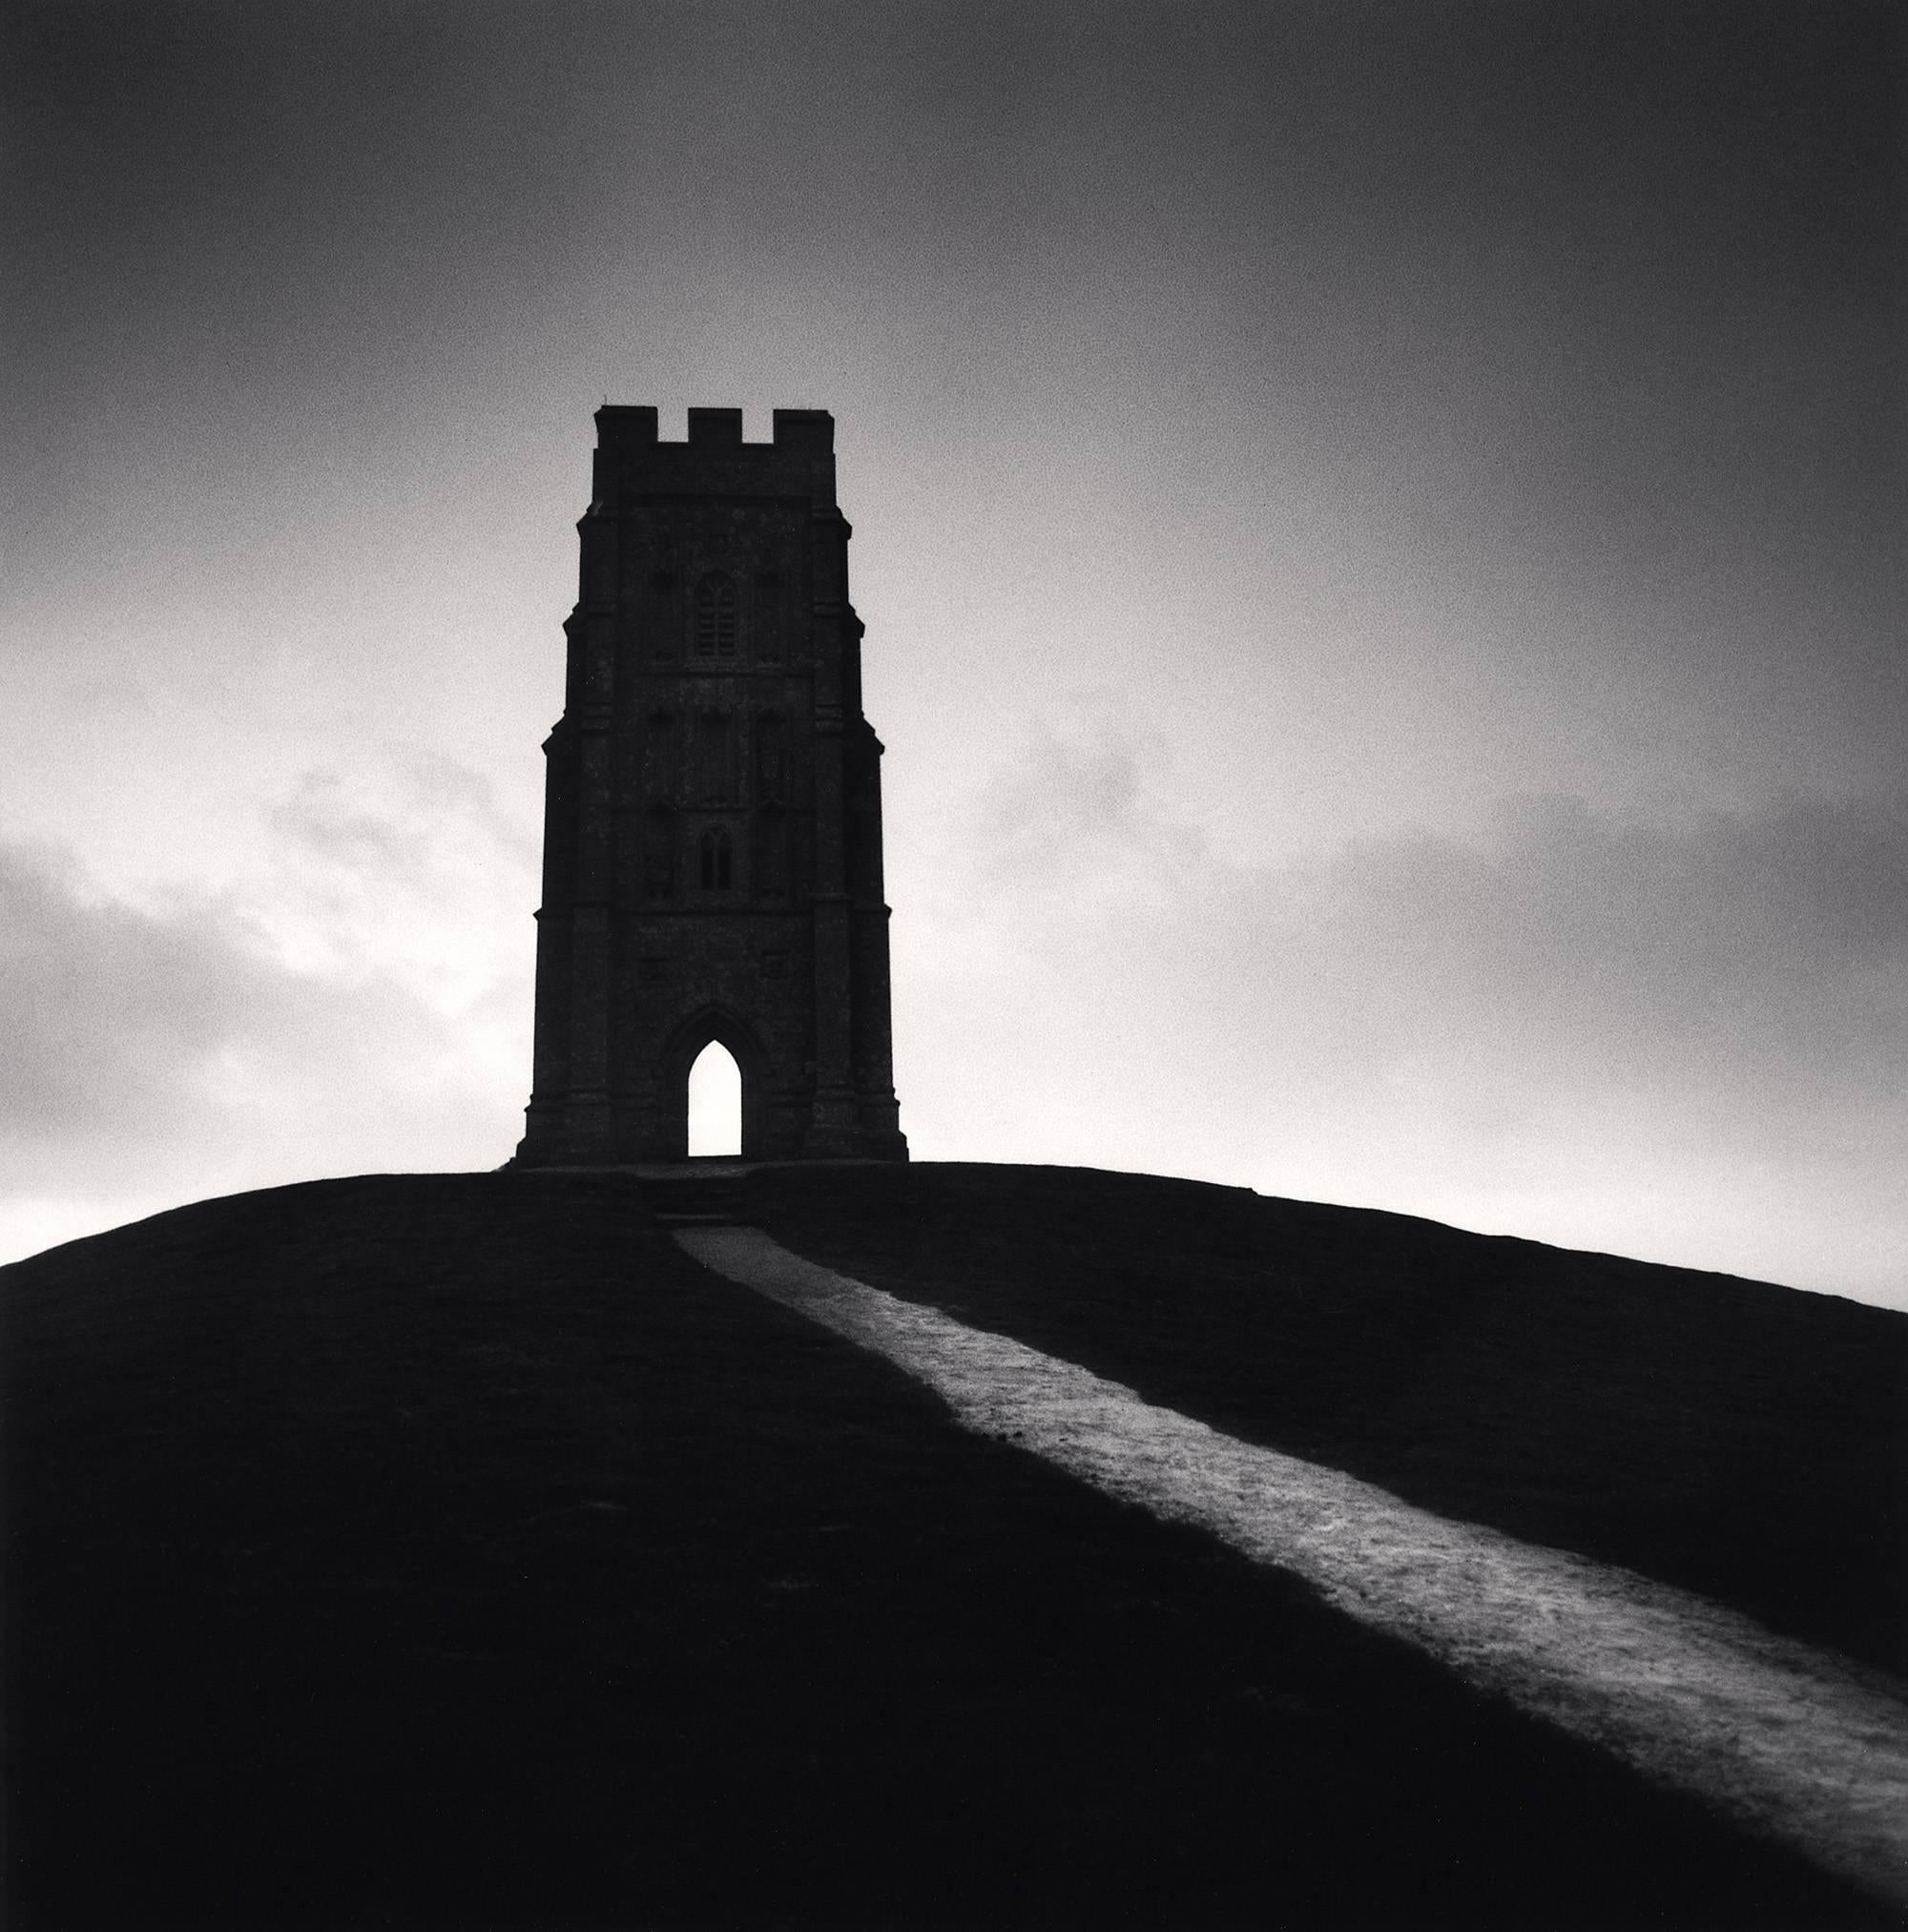 What kind of photos did Michael Kenna take?